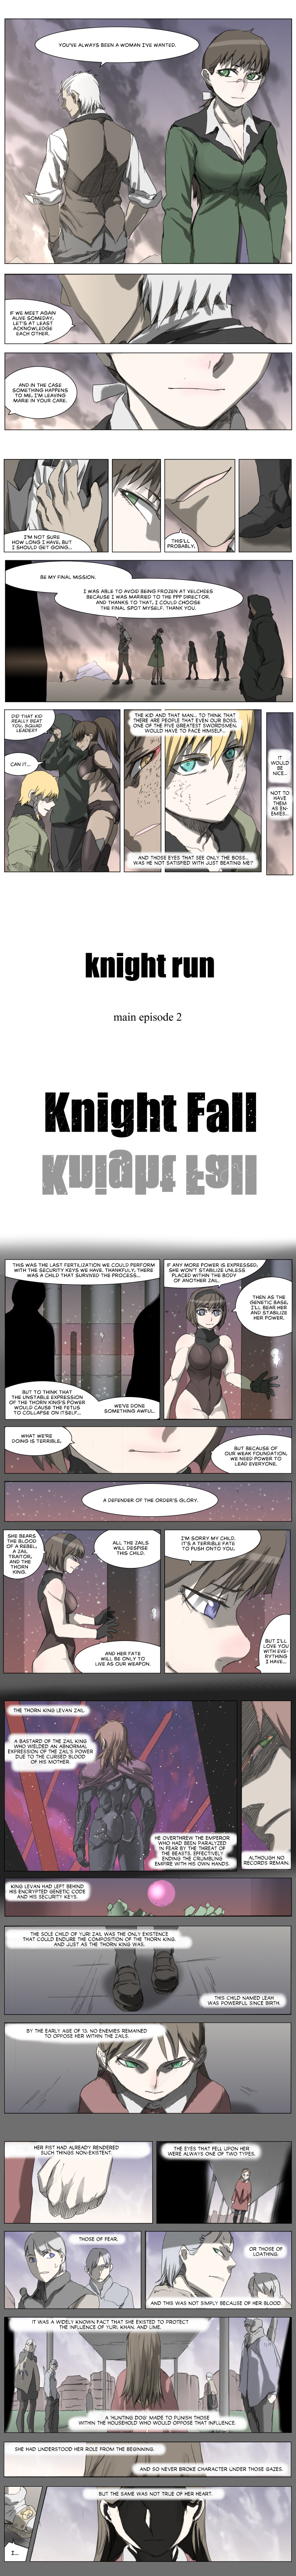 Knight Run Vol.4 Chapter 204: Knight Fall - Part 8 | Sister - Picture 3